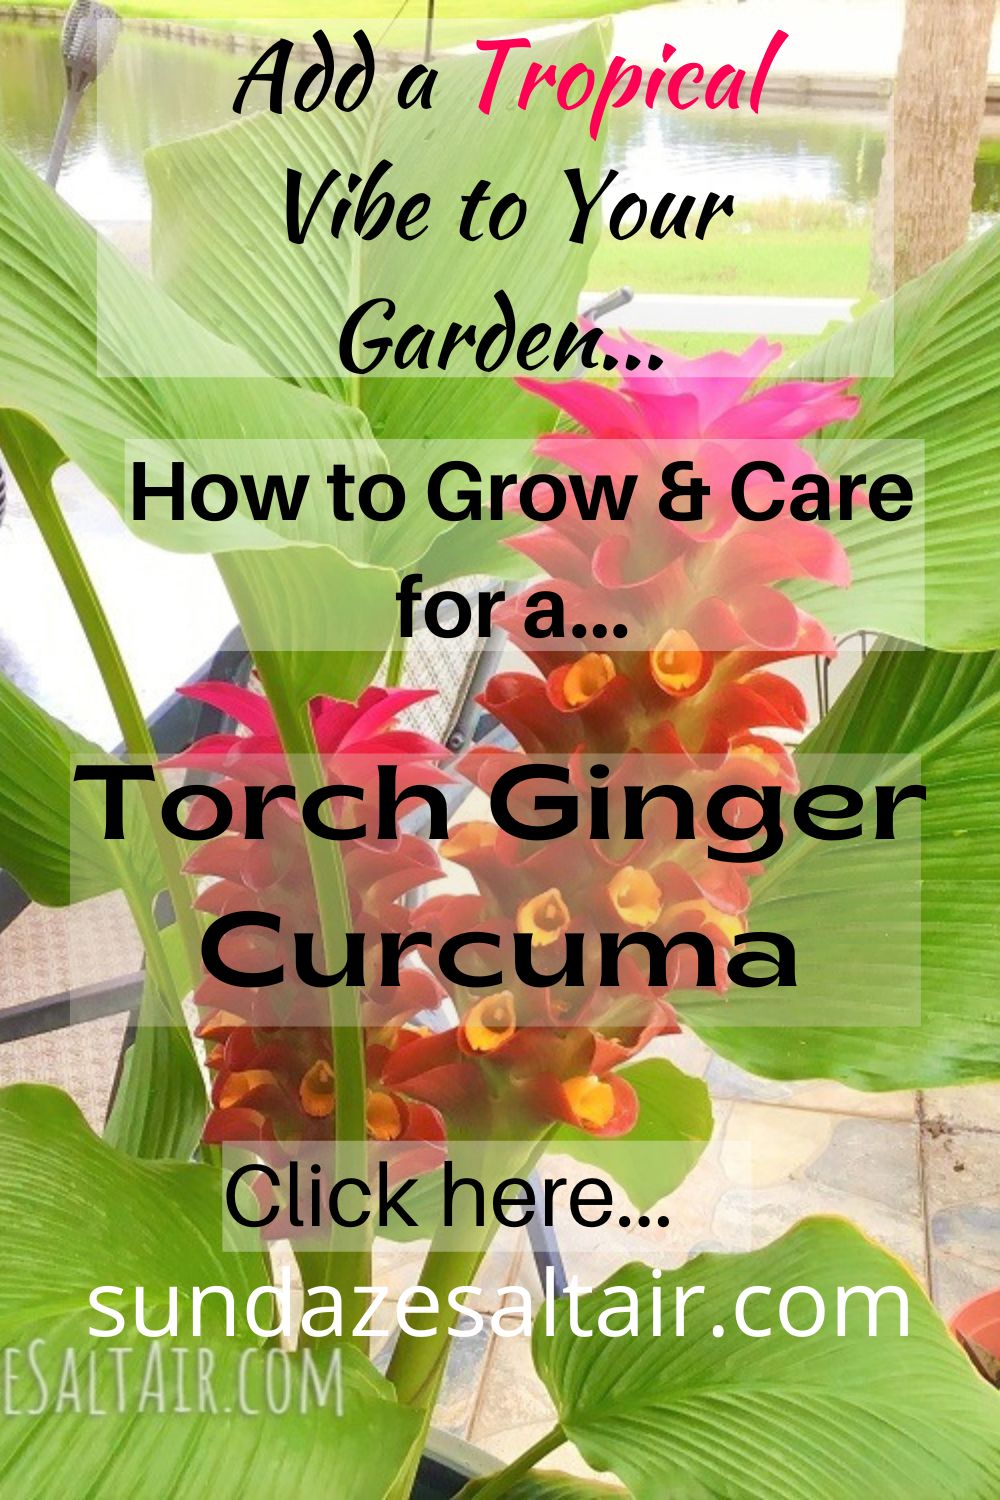 how-to-grow-and-care-for-torch-ginger-curcuma-add-a-tropical-vibe-to-garden-stunning-exotic-ornamental-flaming-torch-ginger-flower-spires-ban-rai-red-ginger-lilies